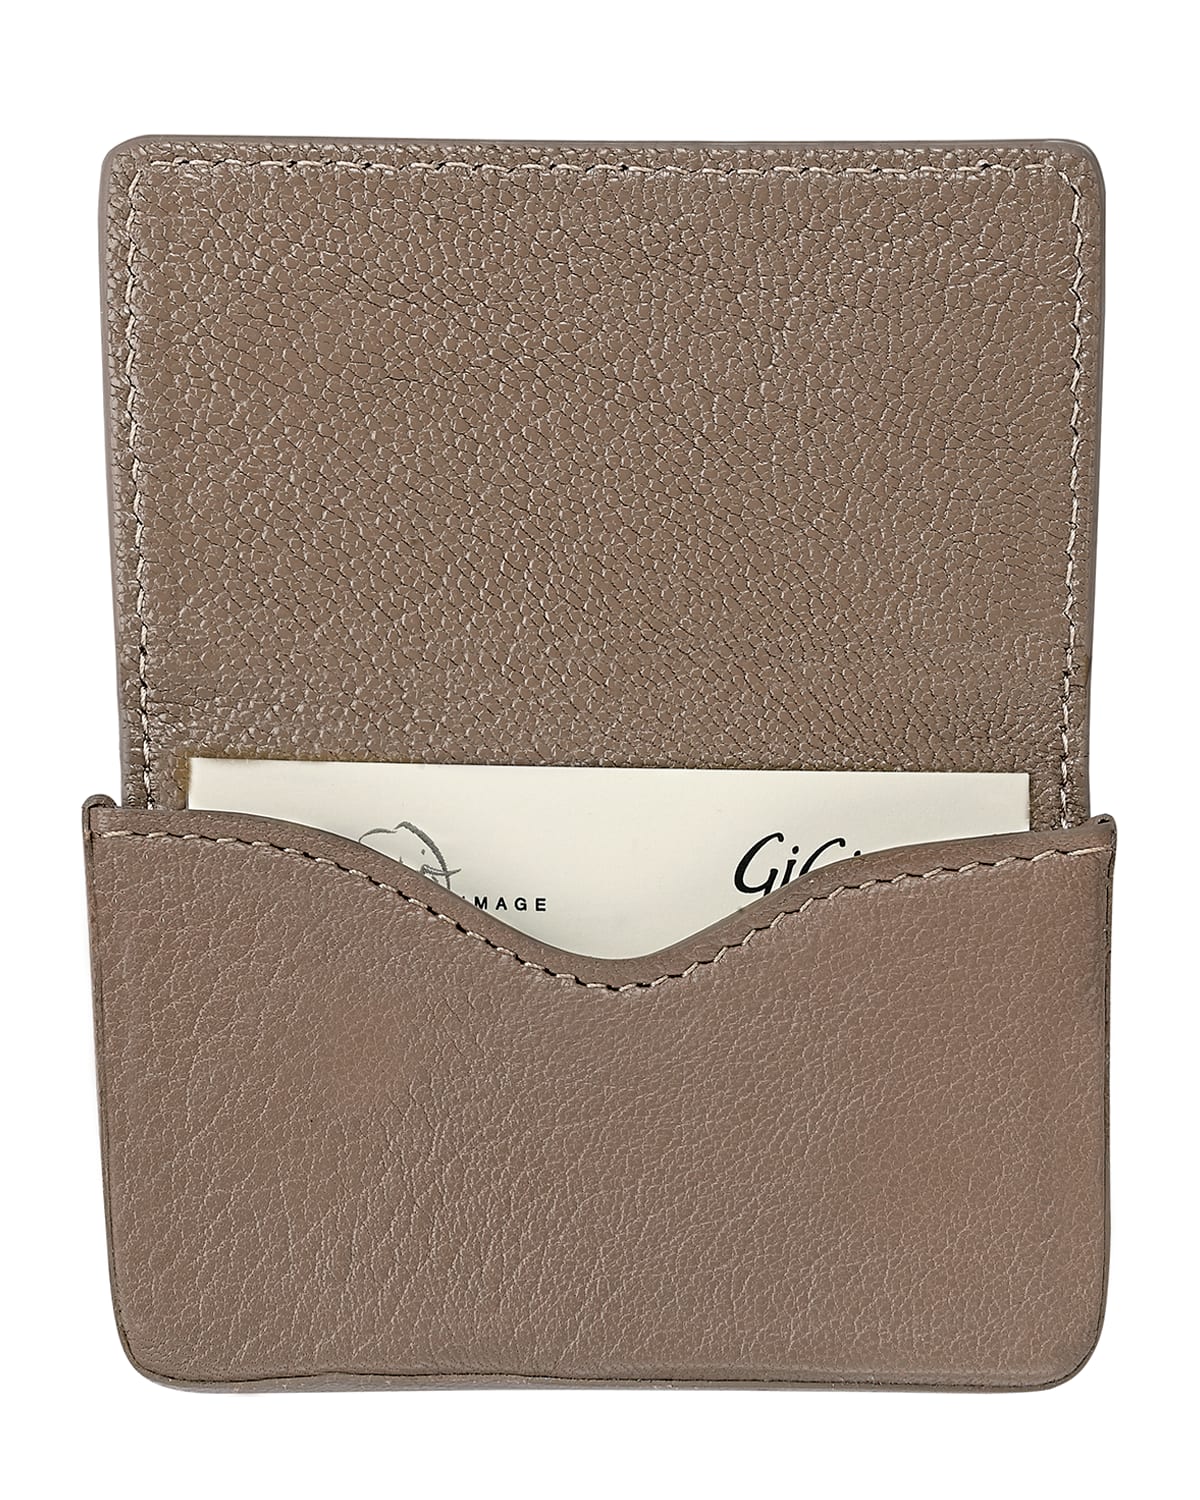 Graphic Image Magnetic Card Case In Taupe